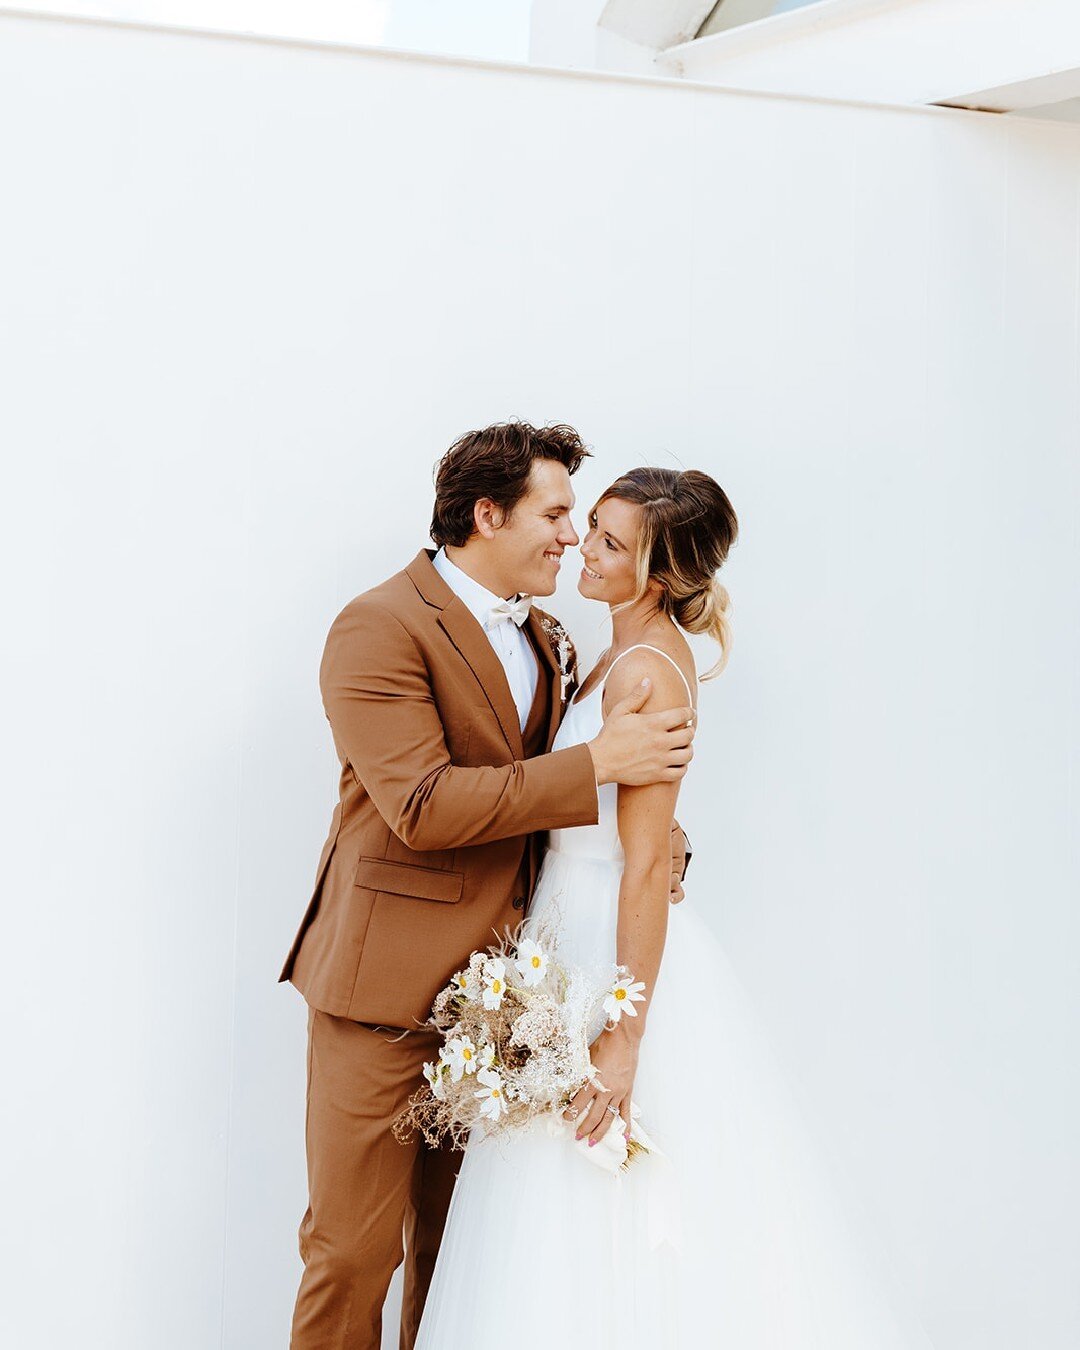 How fun is this play on suit color?? We are not afraid to step outside the box and really show our couples' personality through their wedding style. Stay true to you and what you really want on your wedding day, and let us help execute it! 

Photo | 